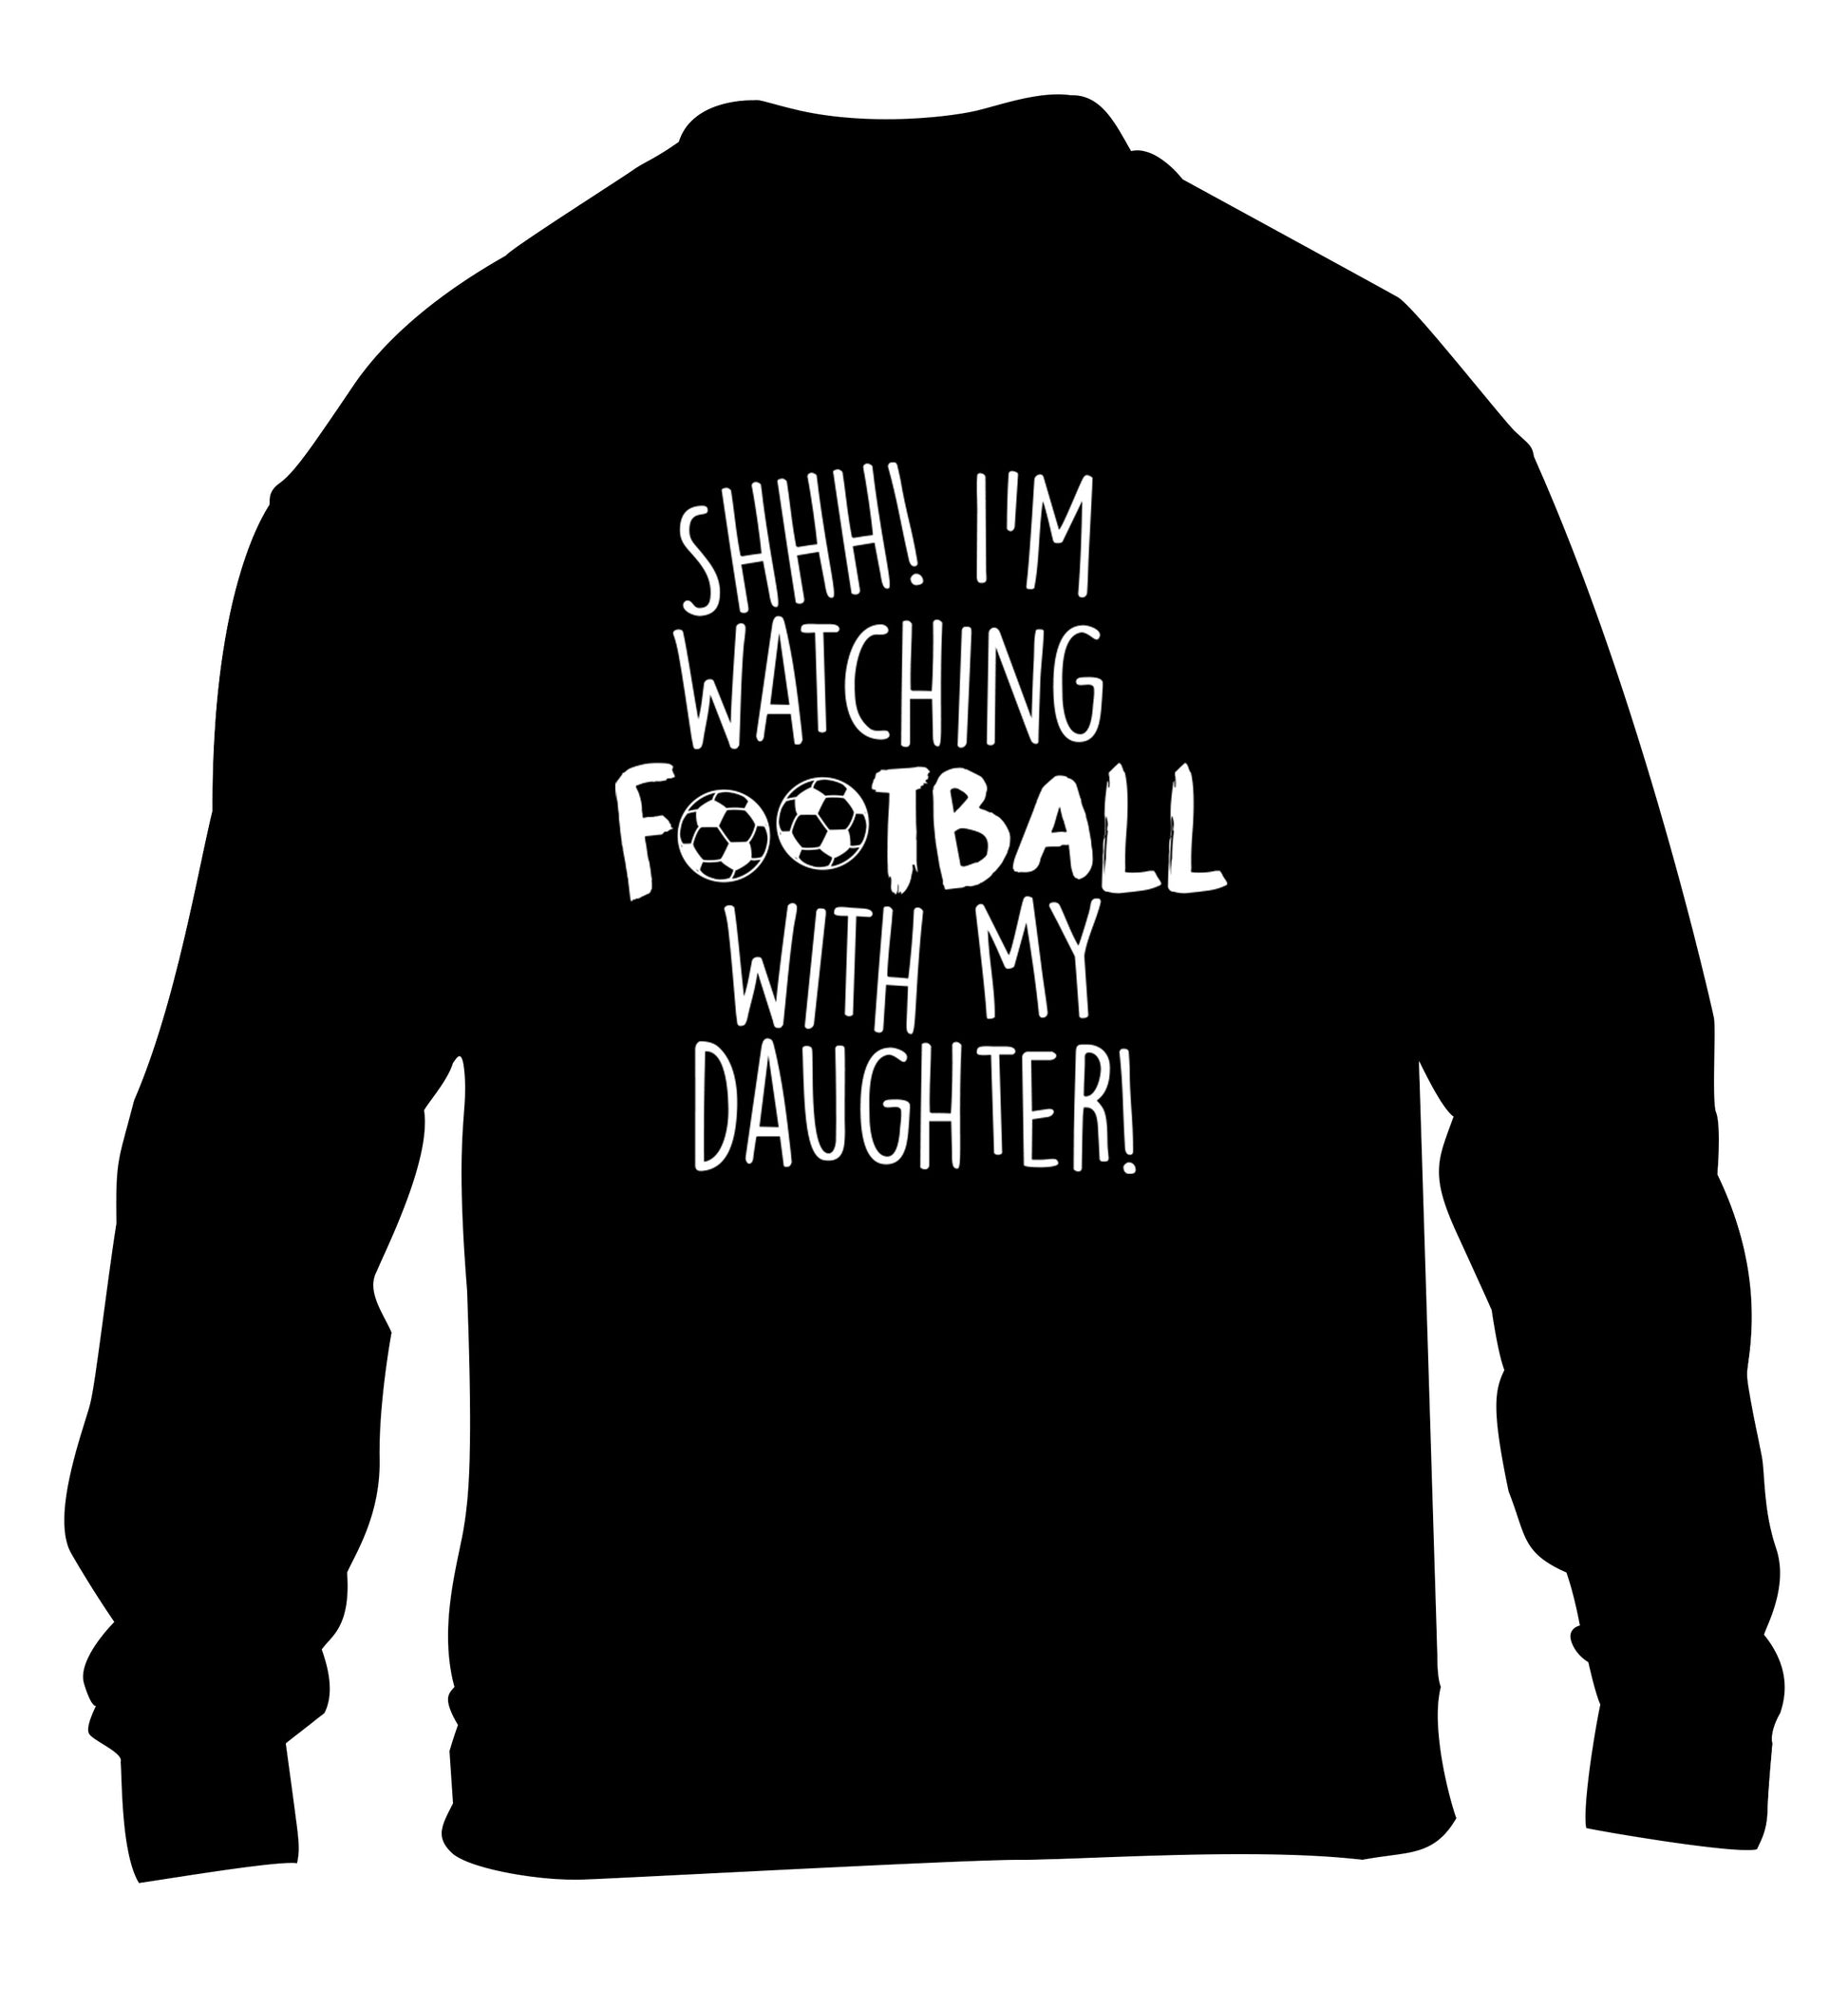 Shhh I'm watching football with my daughter children's black sweater 12-14 Years